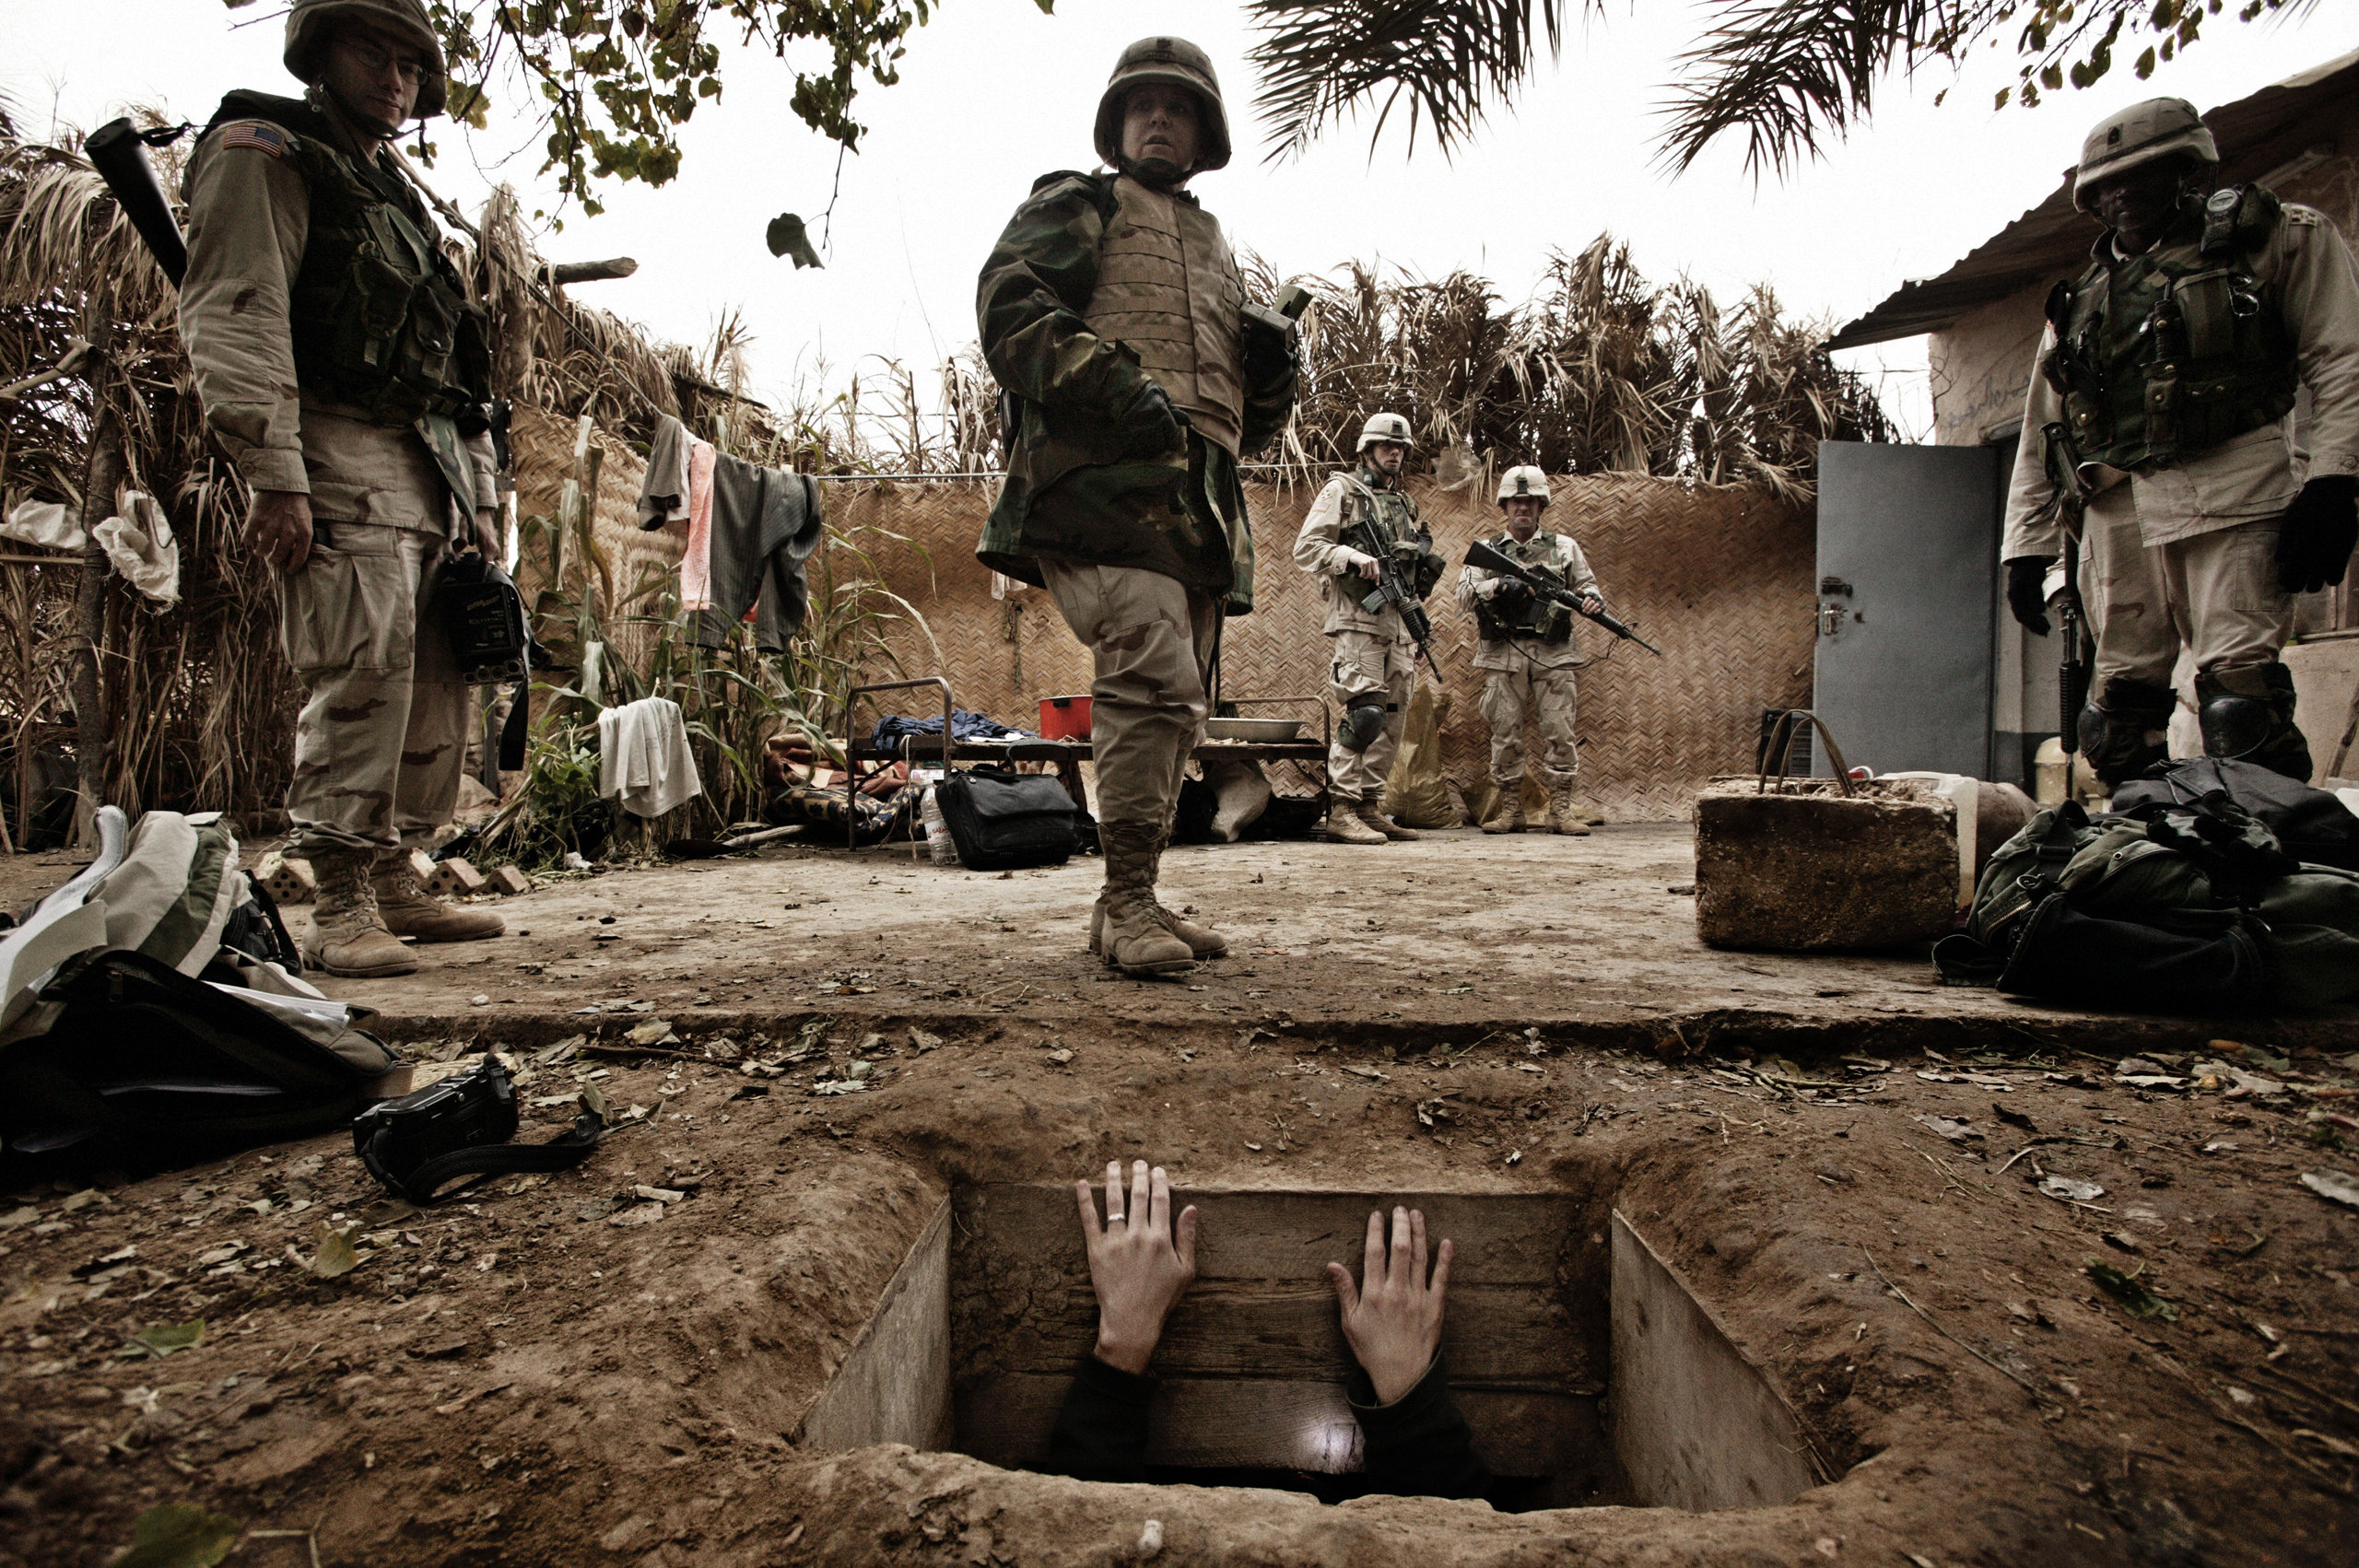 A jounalist climbs out  of the hole where toppled dictator Saddam Hussein was captured in Ad Dawr,  Iraq, near his hometown of Tikrit, Dec. 15, 2003.